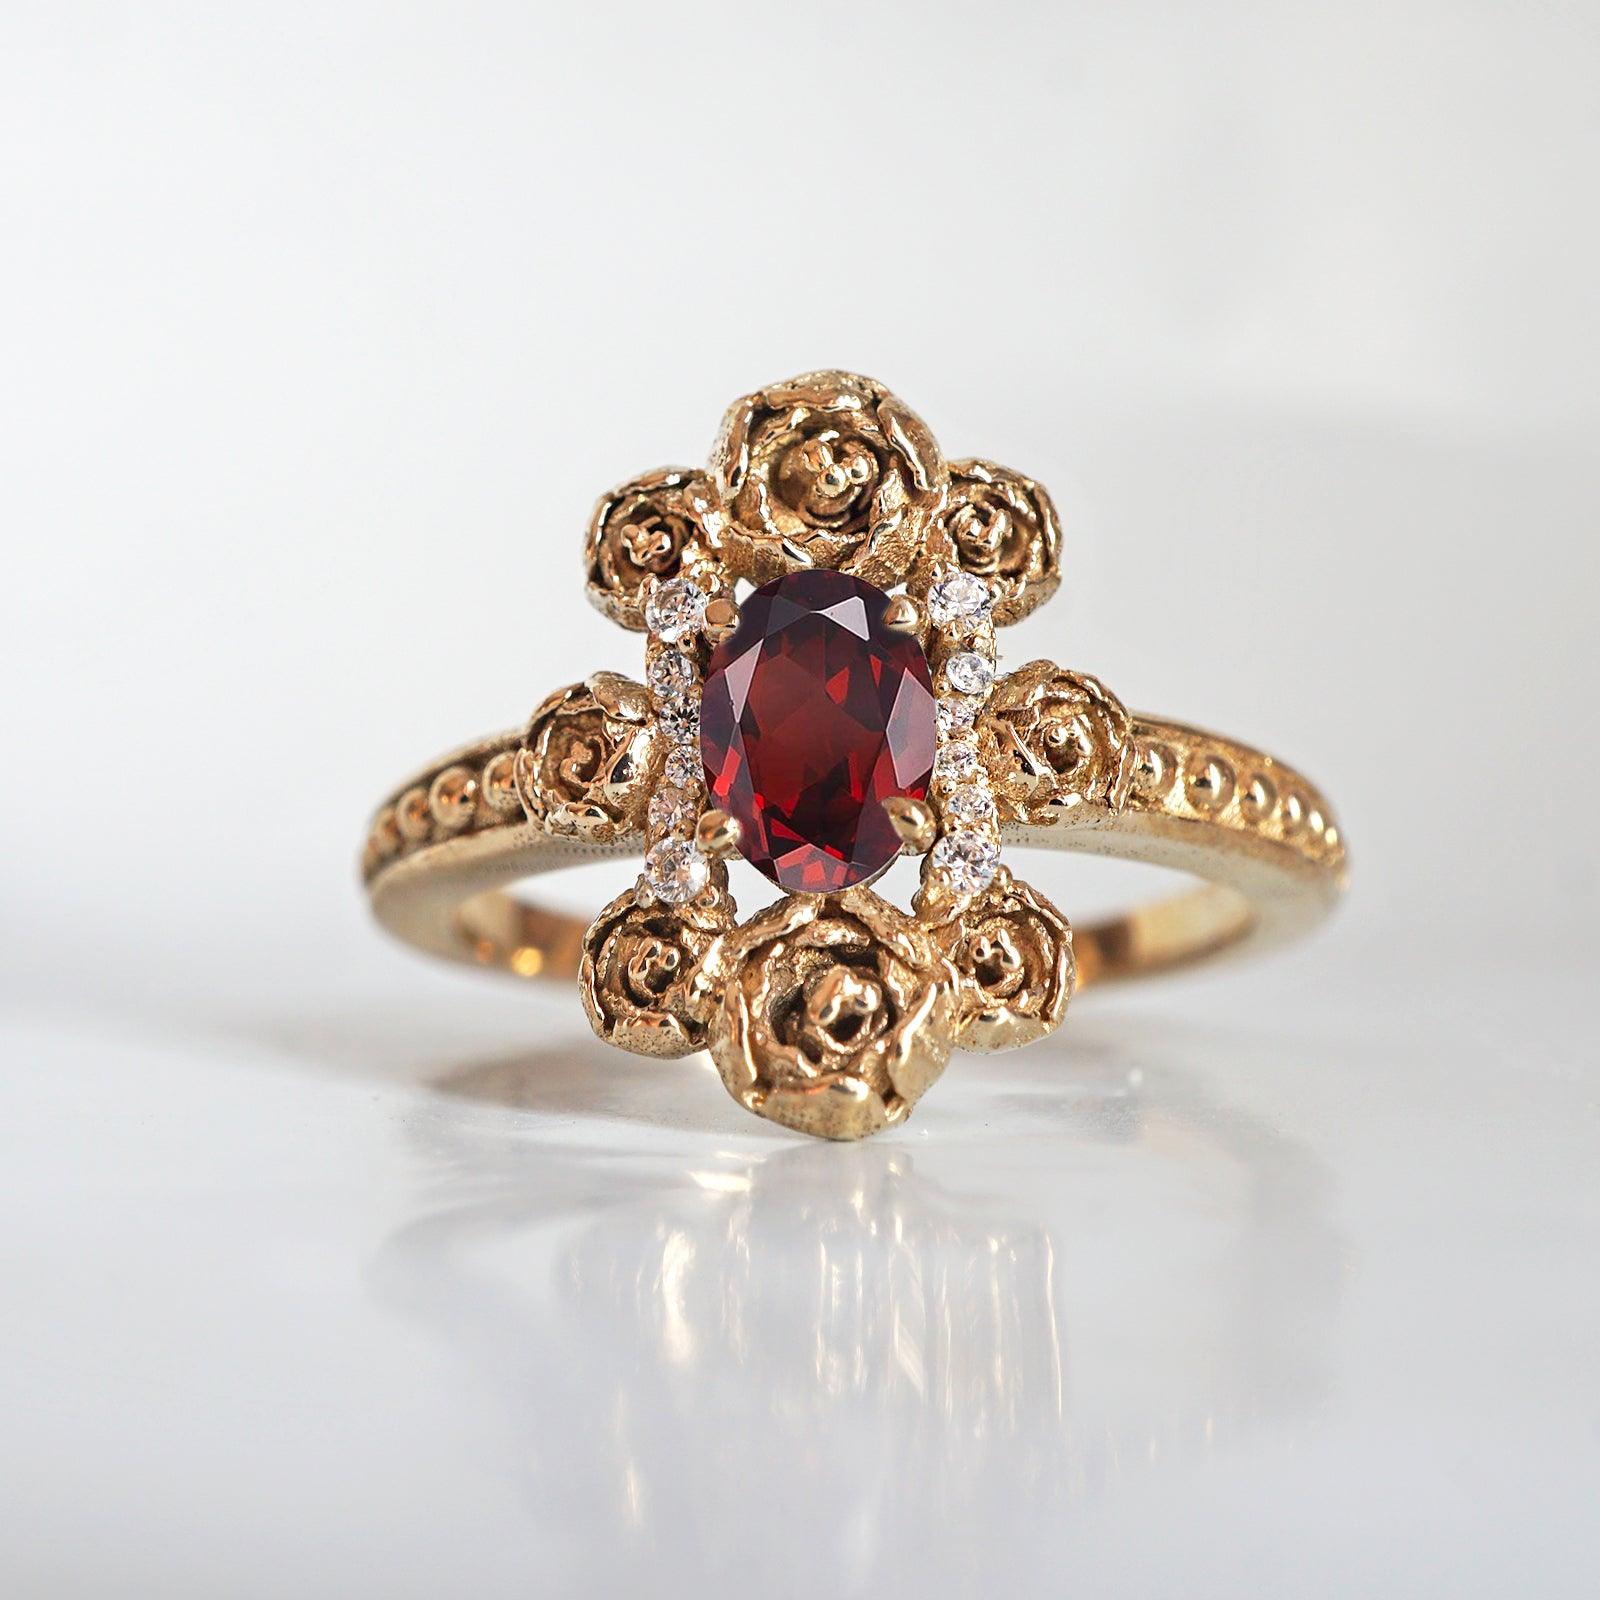 Peonies Oval Garnet Ring in 14K and 18K Gold – Tippy Taste Jewelry